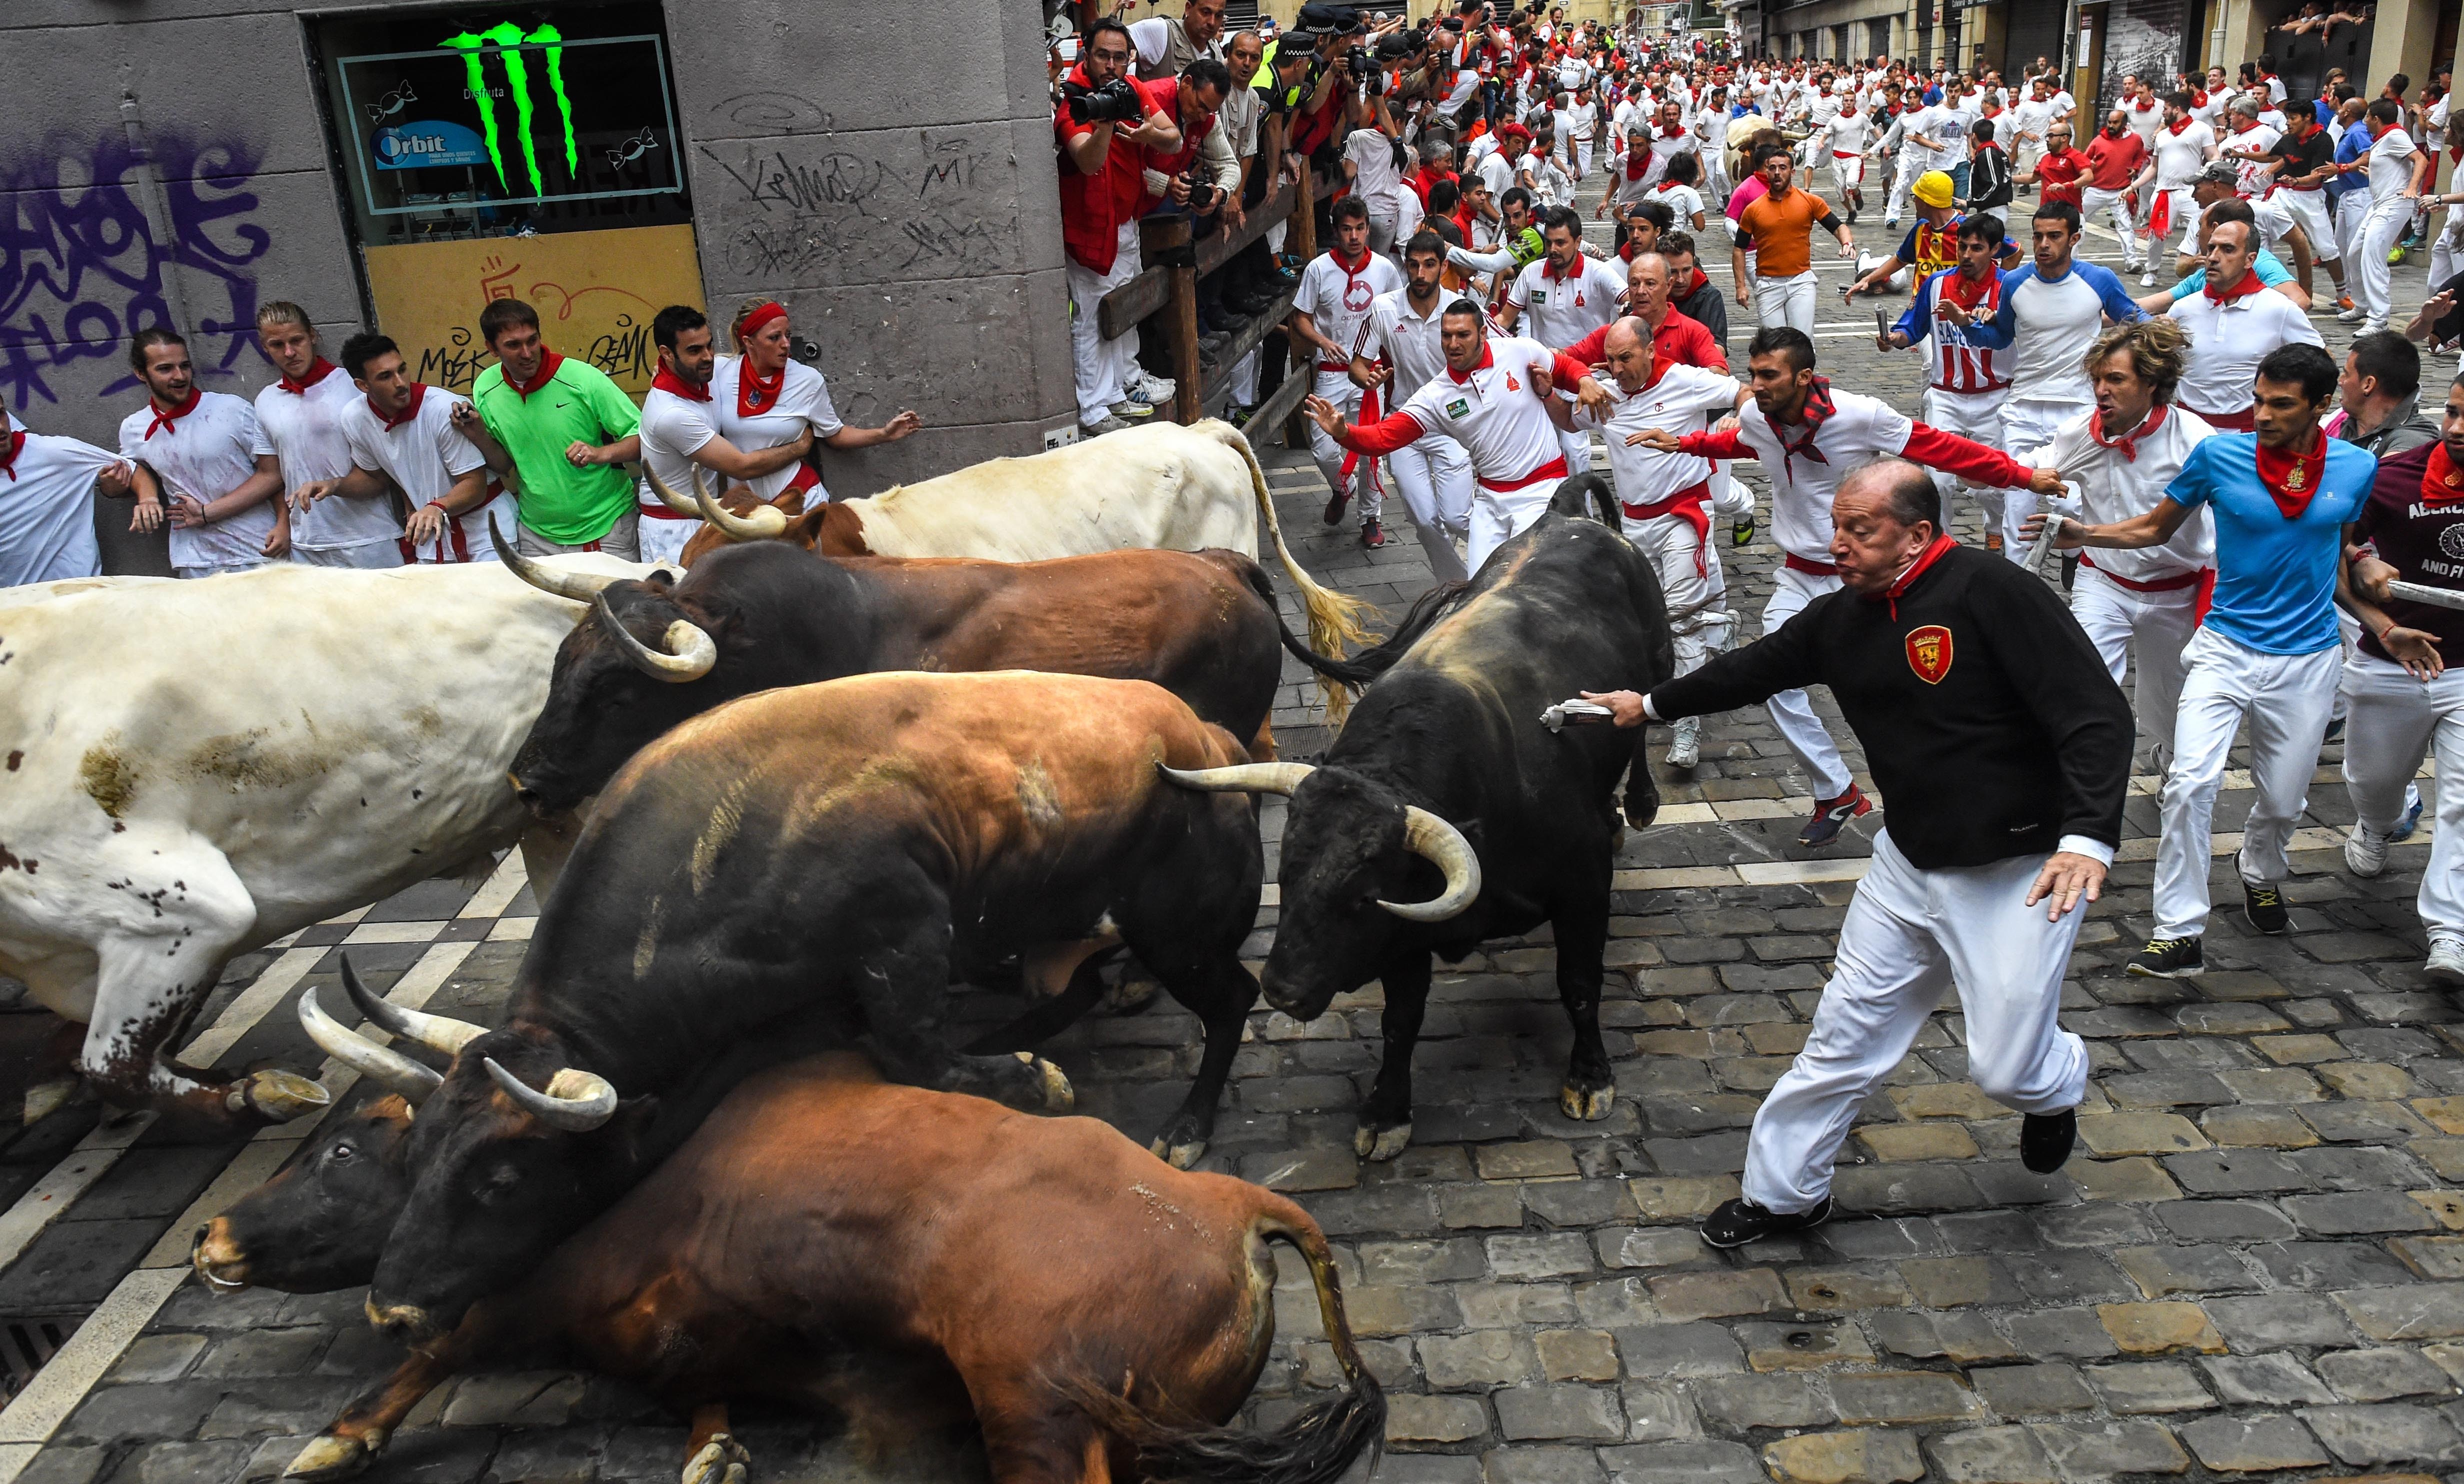 People Aren't The Only Ones Getting Hurt At The Running Of The Bulls ...